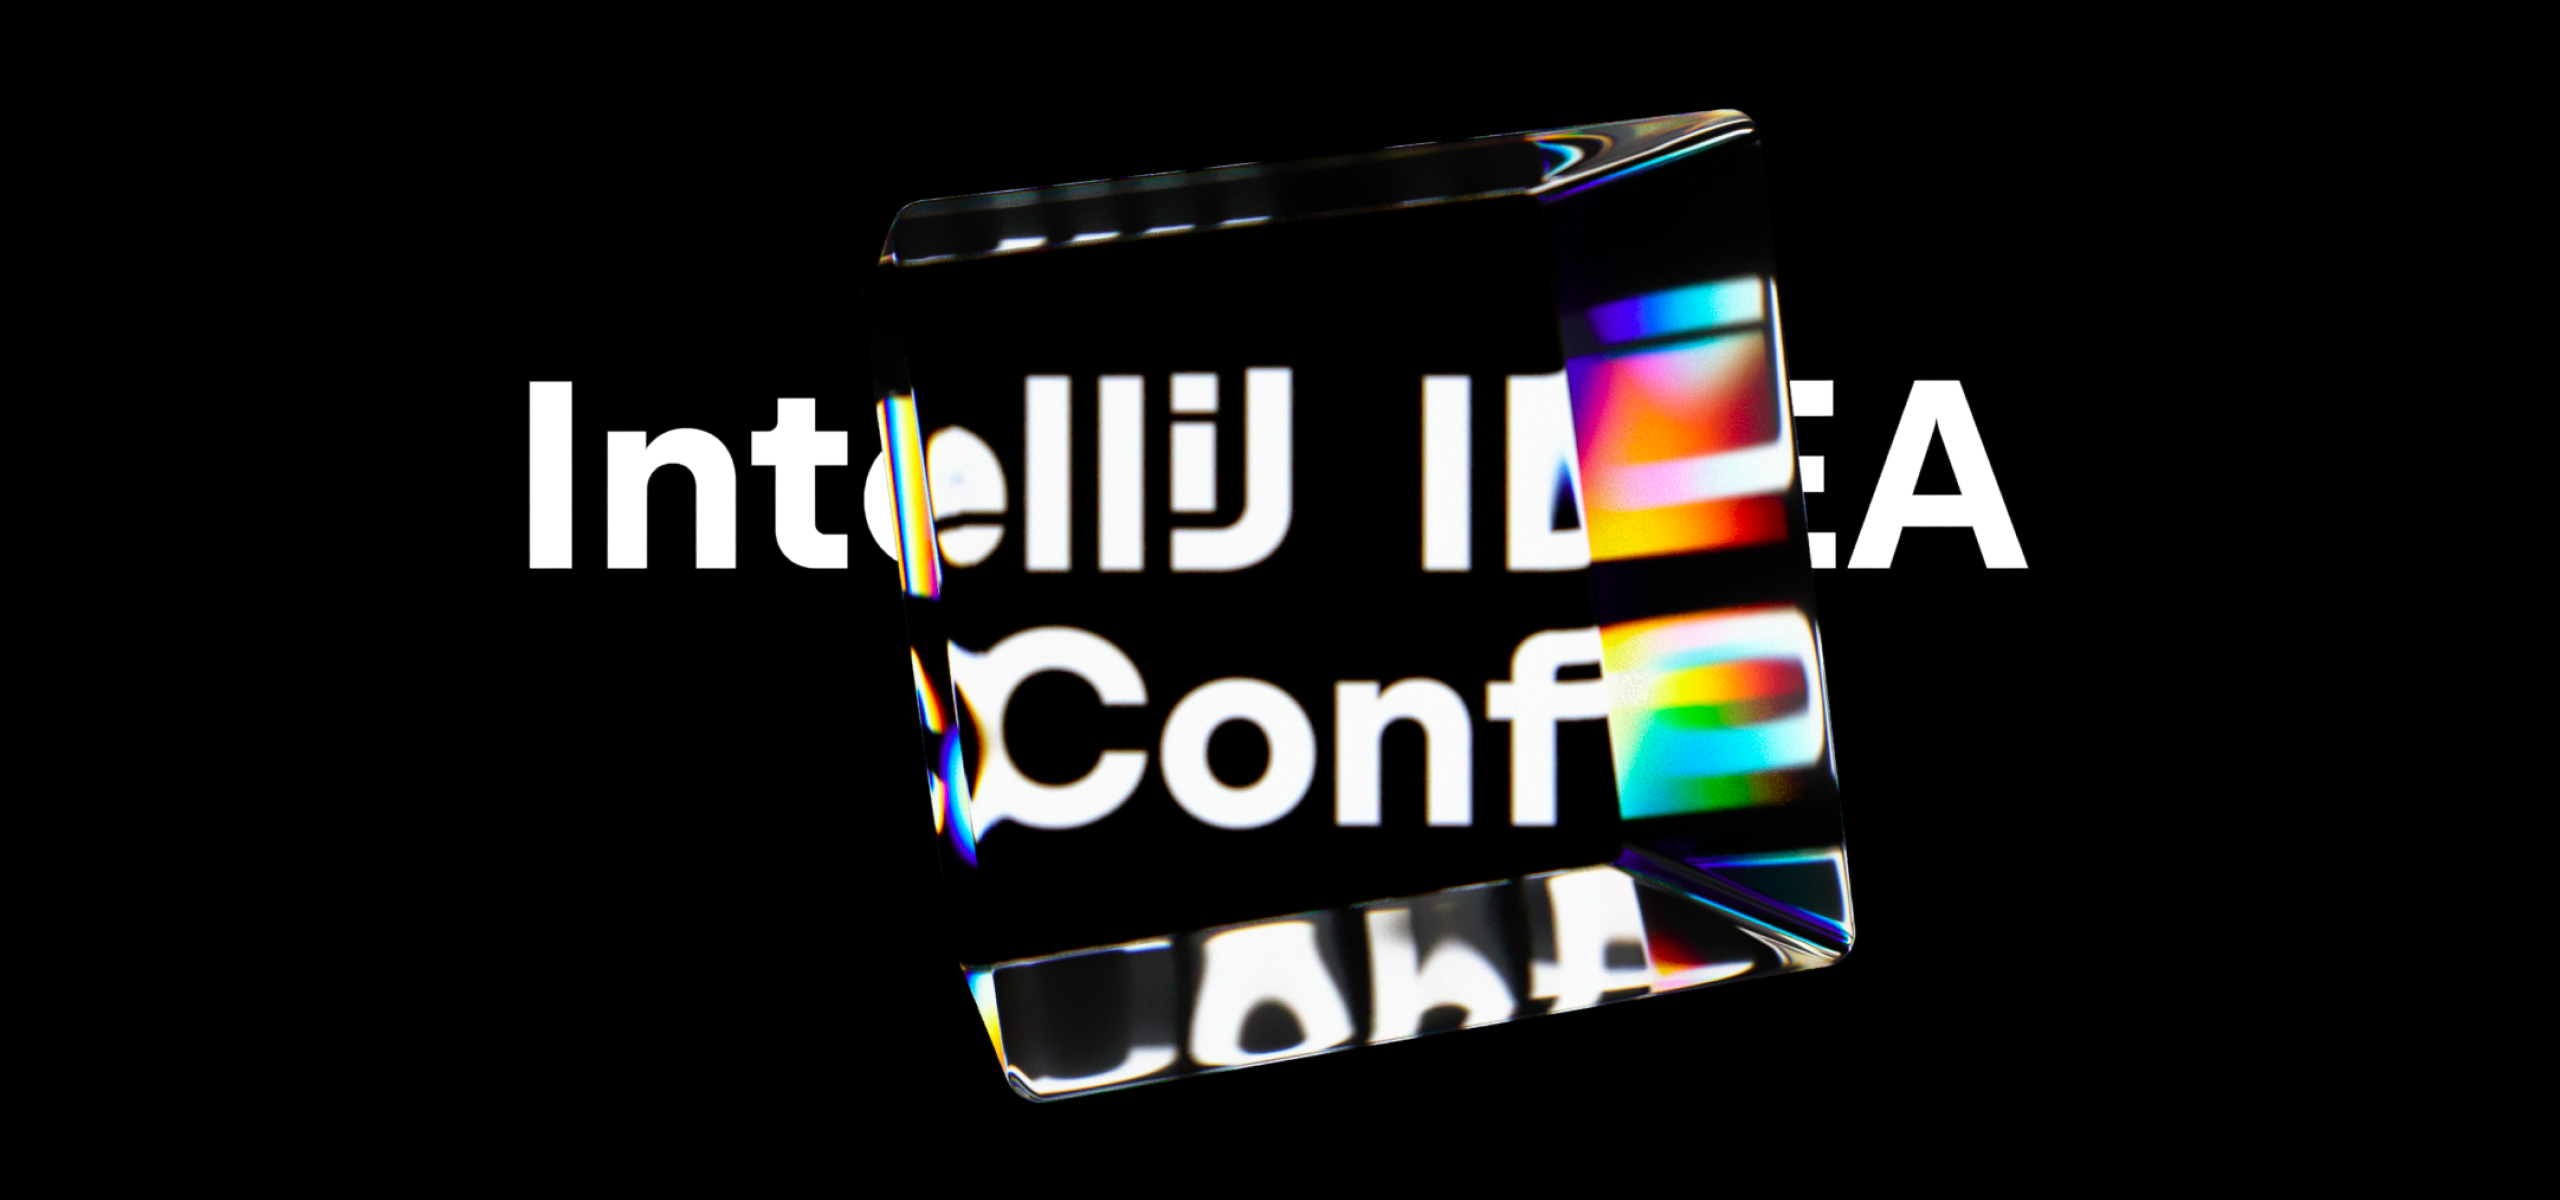 Nom : IntelliJ-IDEA-Conf-2022.png
Affichages : 117663
Taille : 1,07 Mo